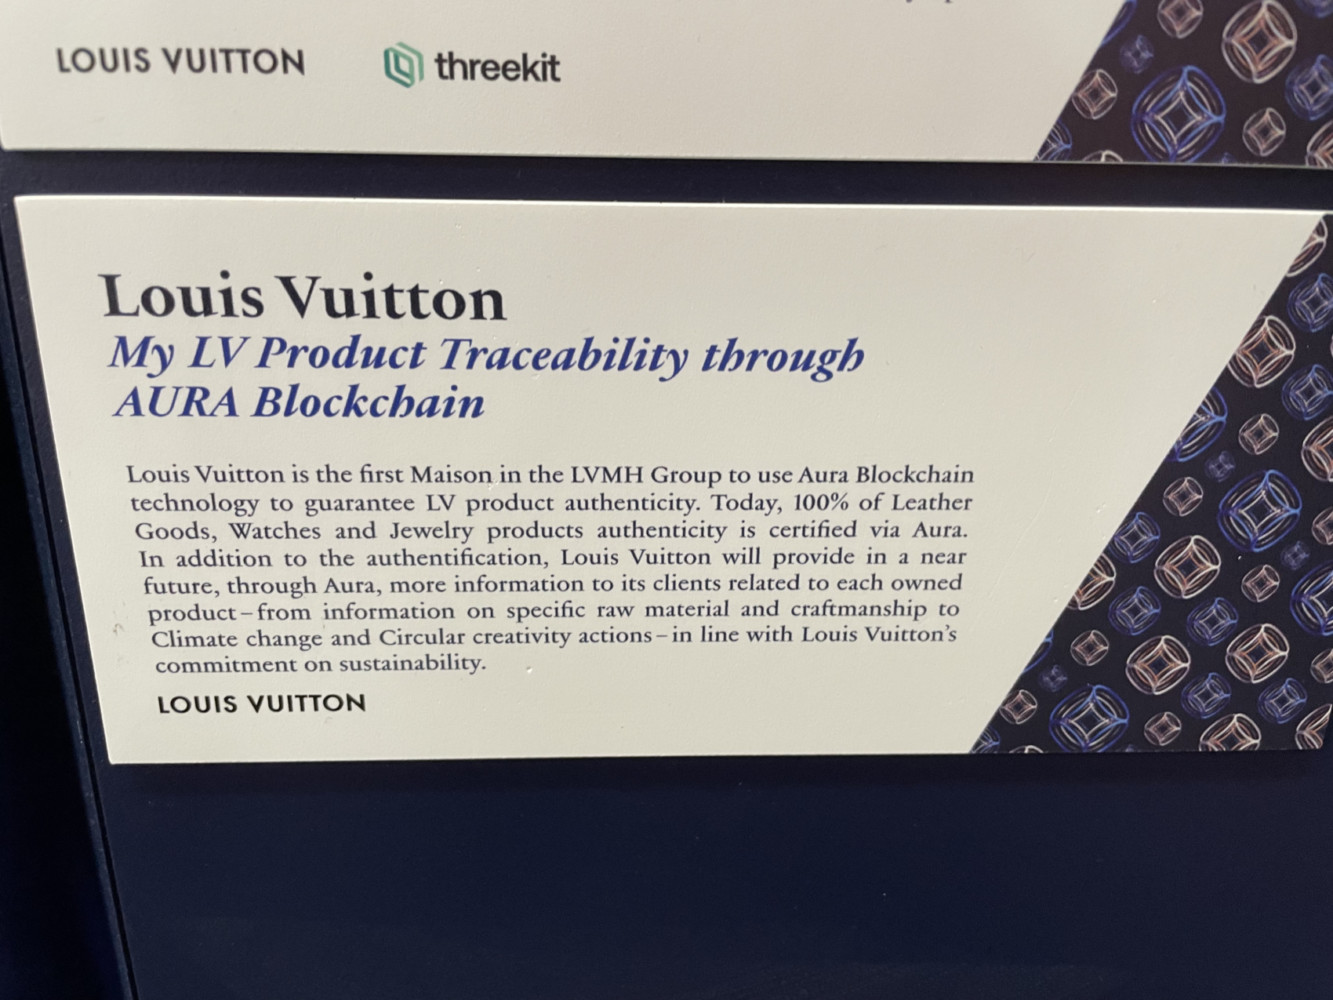 Louis Vuitton on LVMH stand - Vivatech 2021- tracability, blockchain, RFID- Lab Luxury and Retail